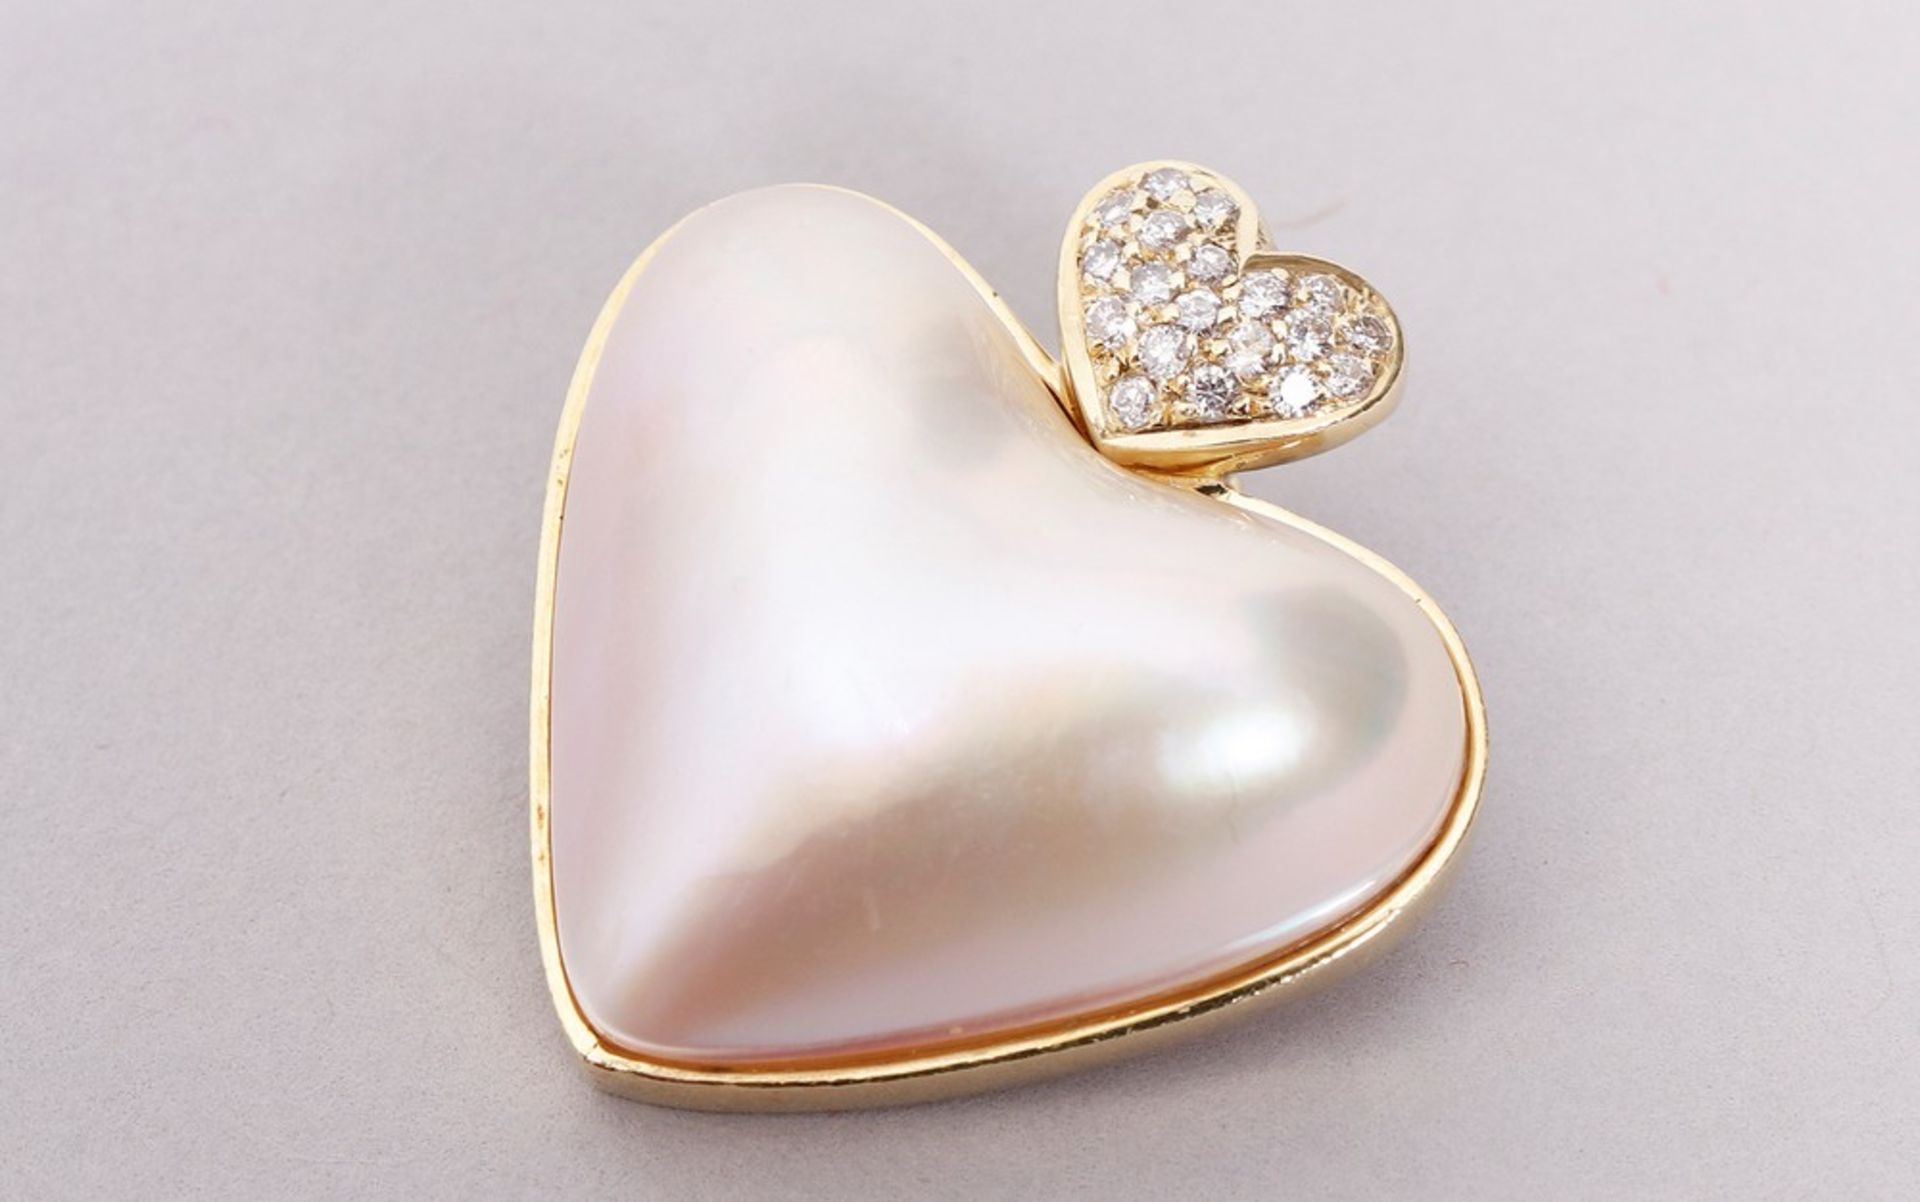 Heart-pendant, 585 gold - Image 3 of 6